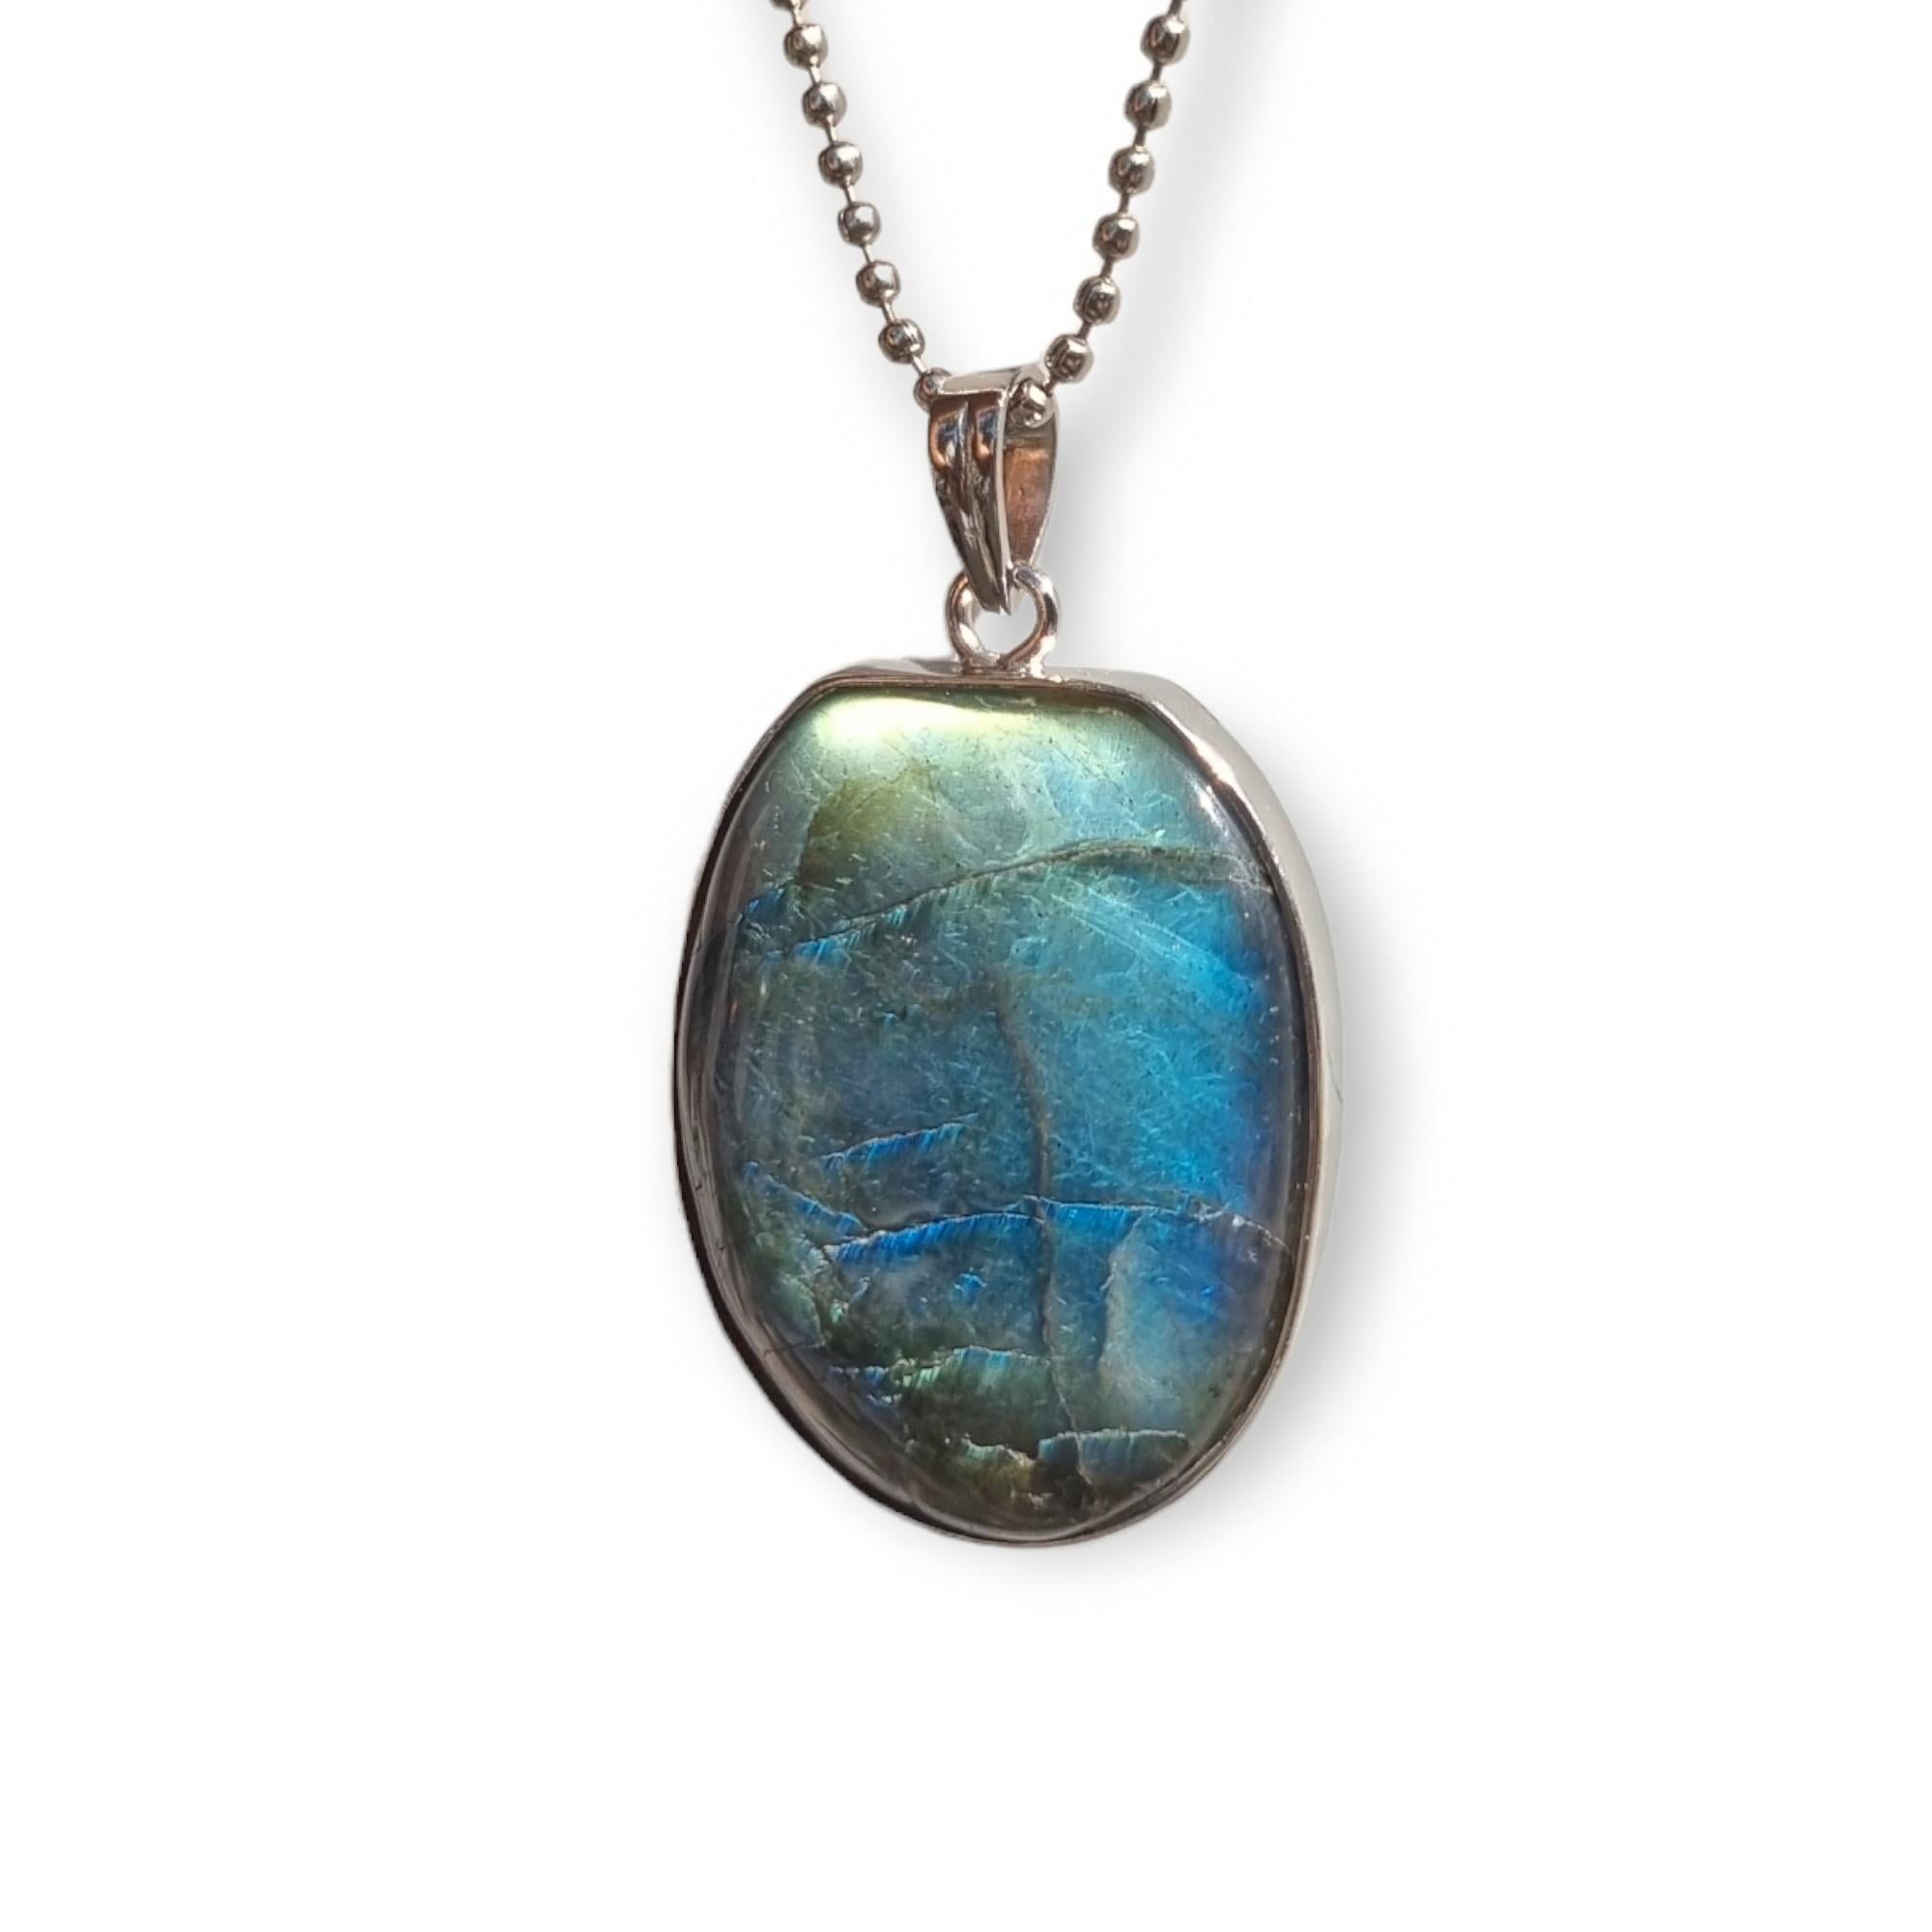 Product Specifications:

Gemstone - Labradorite 
Carat weight - 105.30 Carat
Total piece weight - 24.67 grams
Metal - sterling silver
Metal weight - 3.6 grams
Pendant dimensions - 53 x 31 x 4 mm

The Labradorite stone is known for its unique,